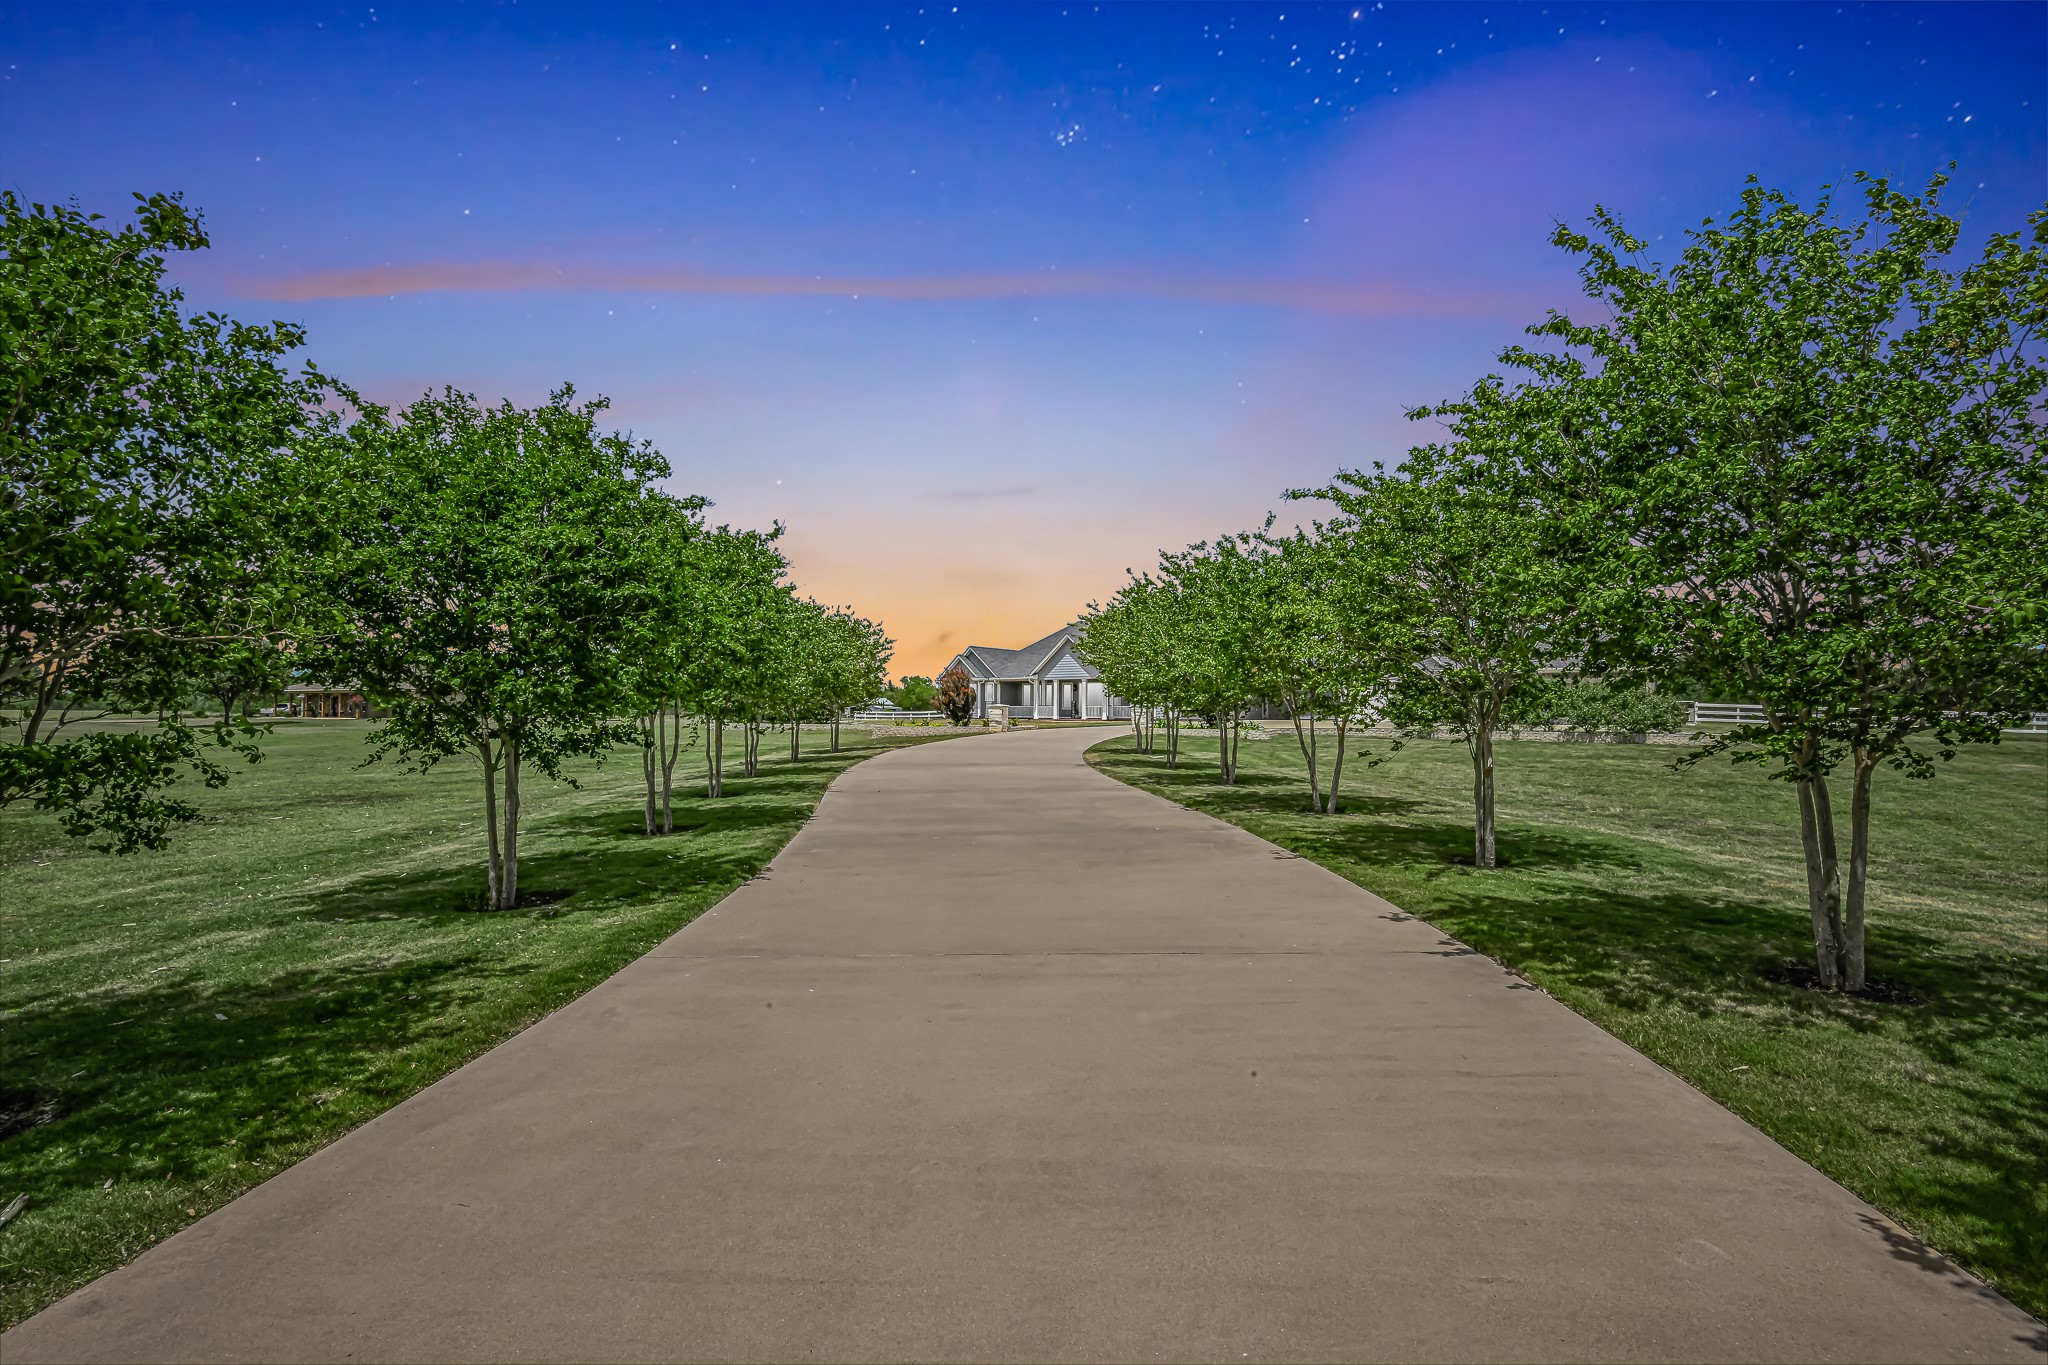 Crepe Myrtle trees line the long driveway as you  enter this property.